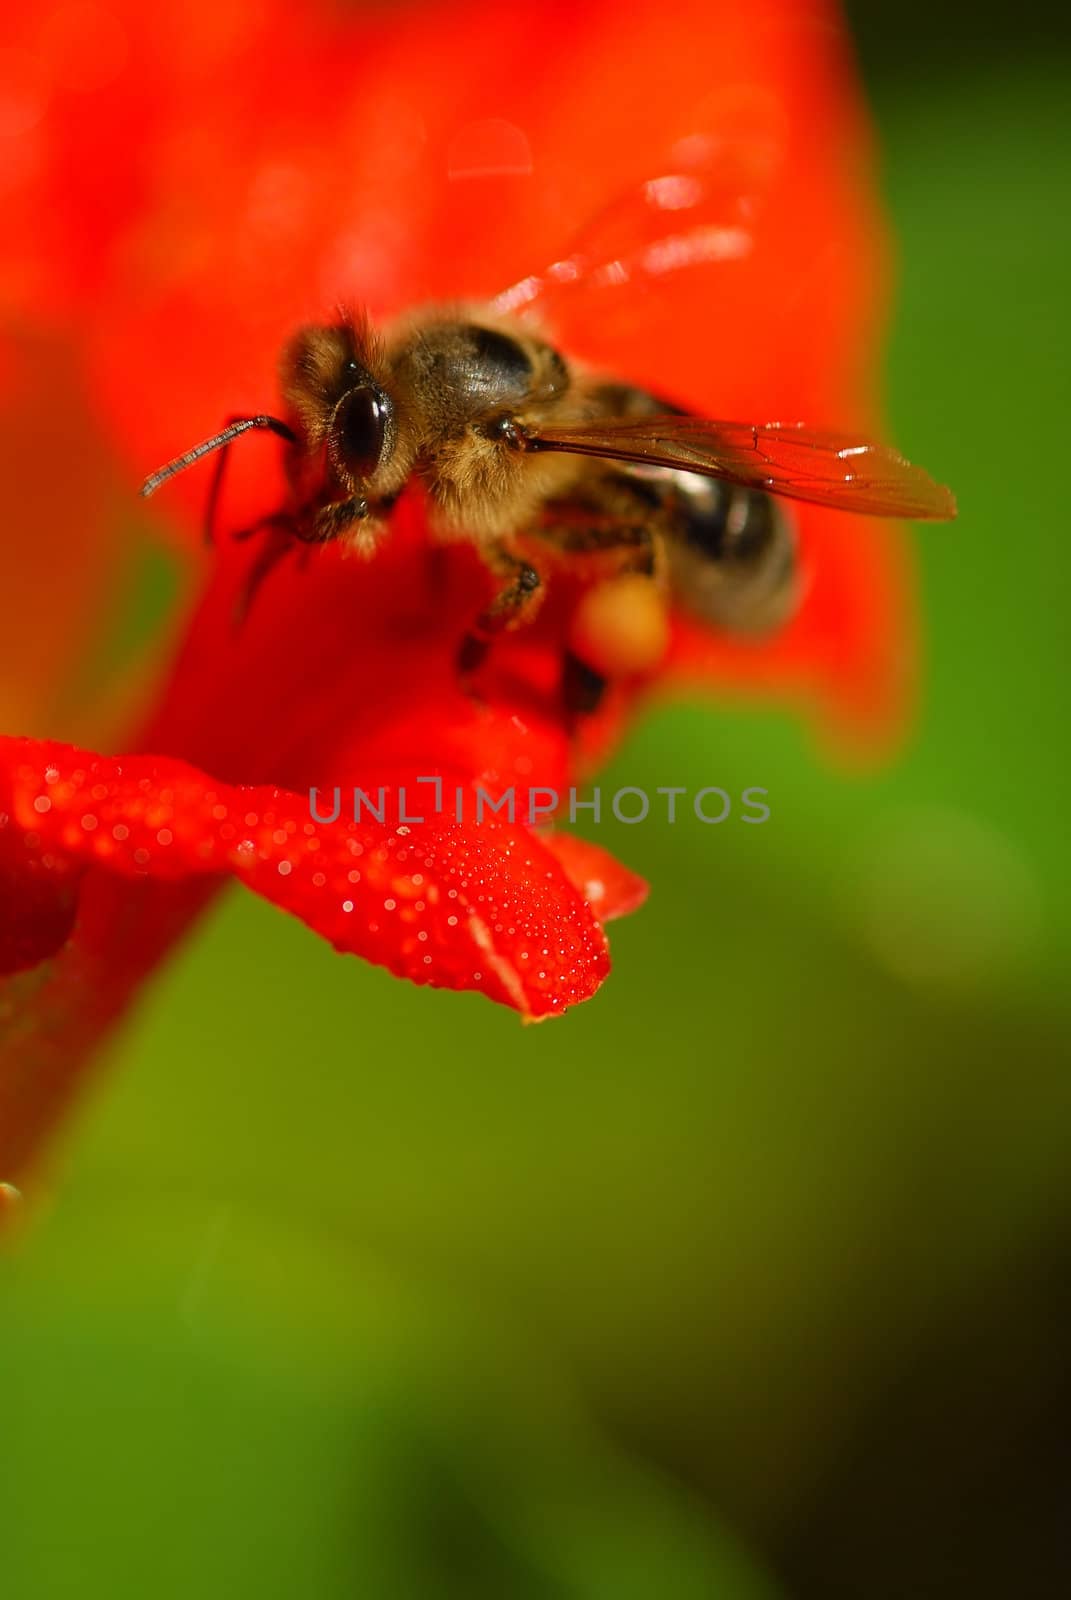 Bee working on nasturtium flower. Eye and wing of insect in focus.